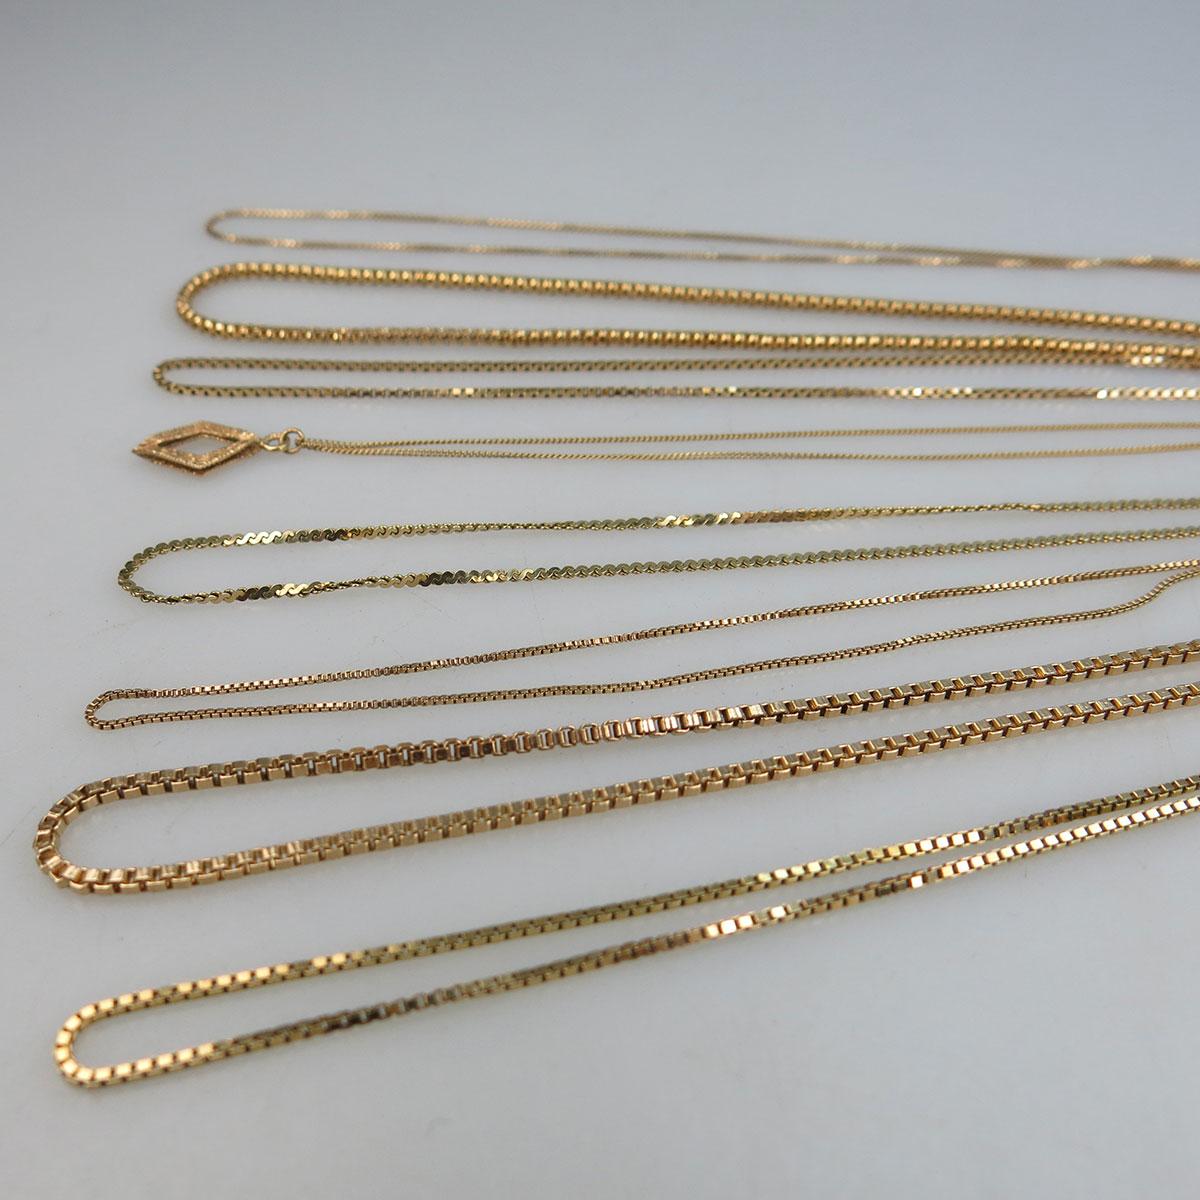 1 x 18k; 4 x 14k and 4 x 10k Yellow Gold Chains